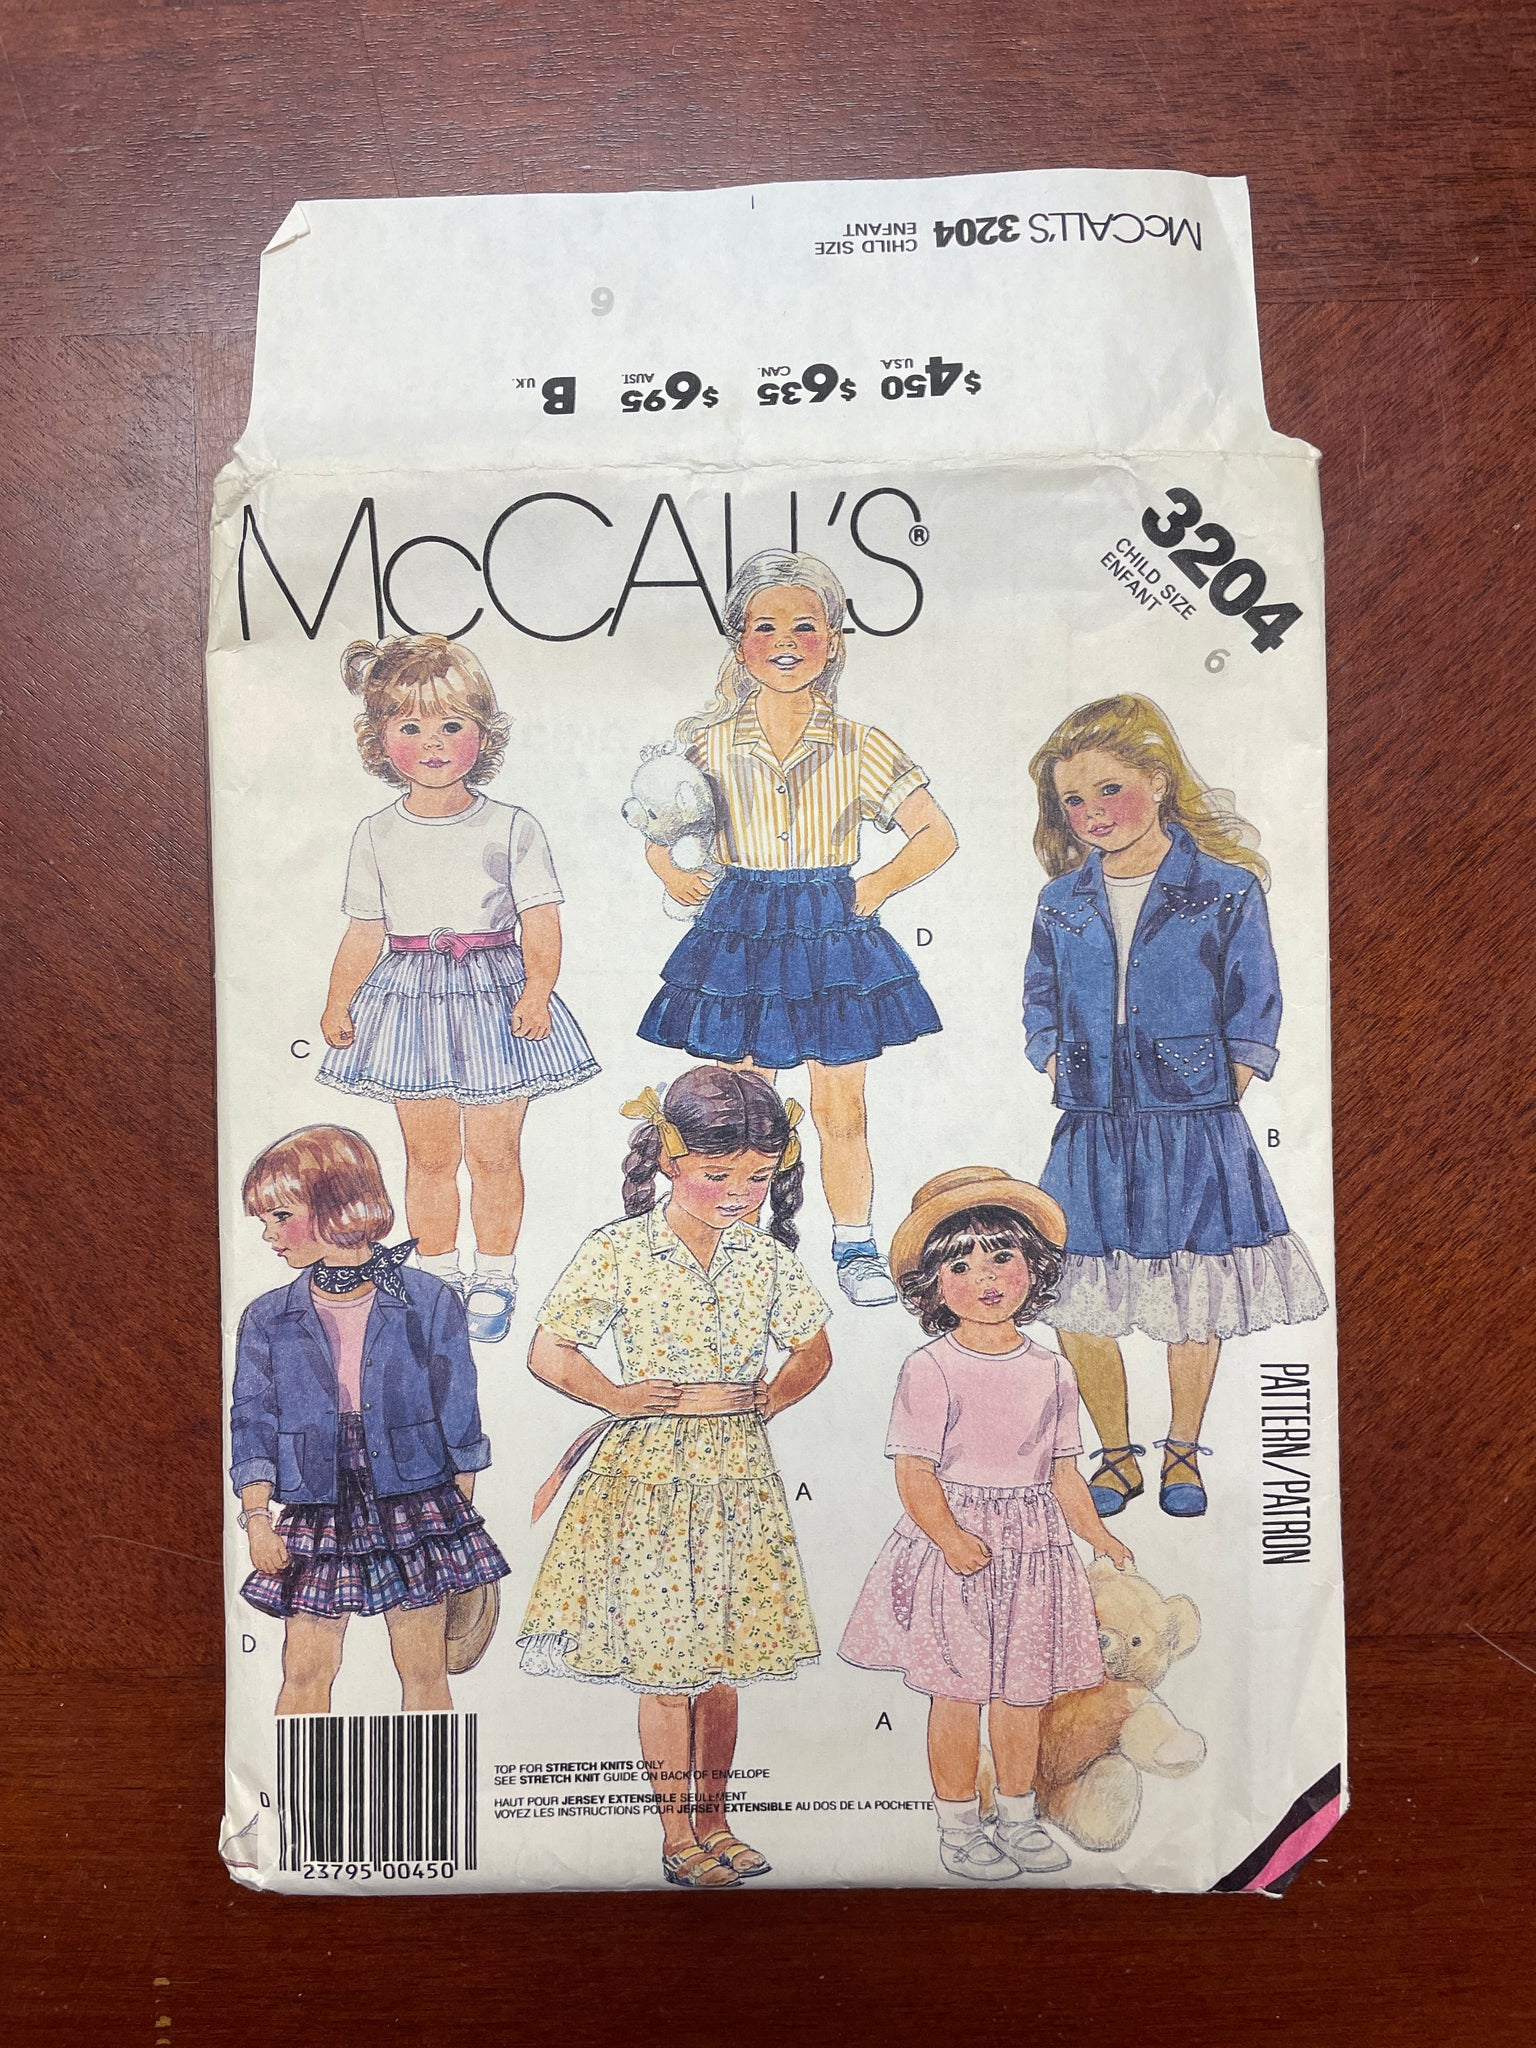 1987 McCall's 3204 Pattern - Child's Shirt, Jacket, Skirt and Petticoat FACTORY FOLDED